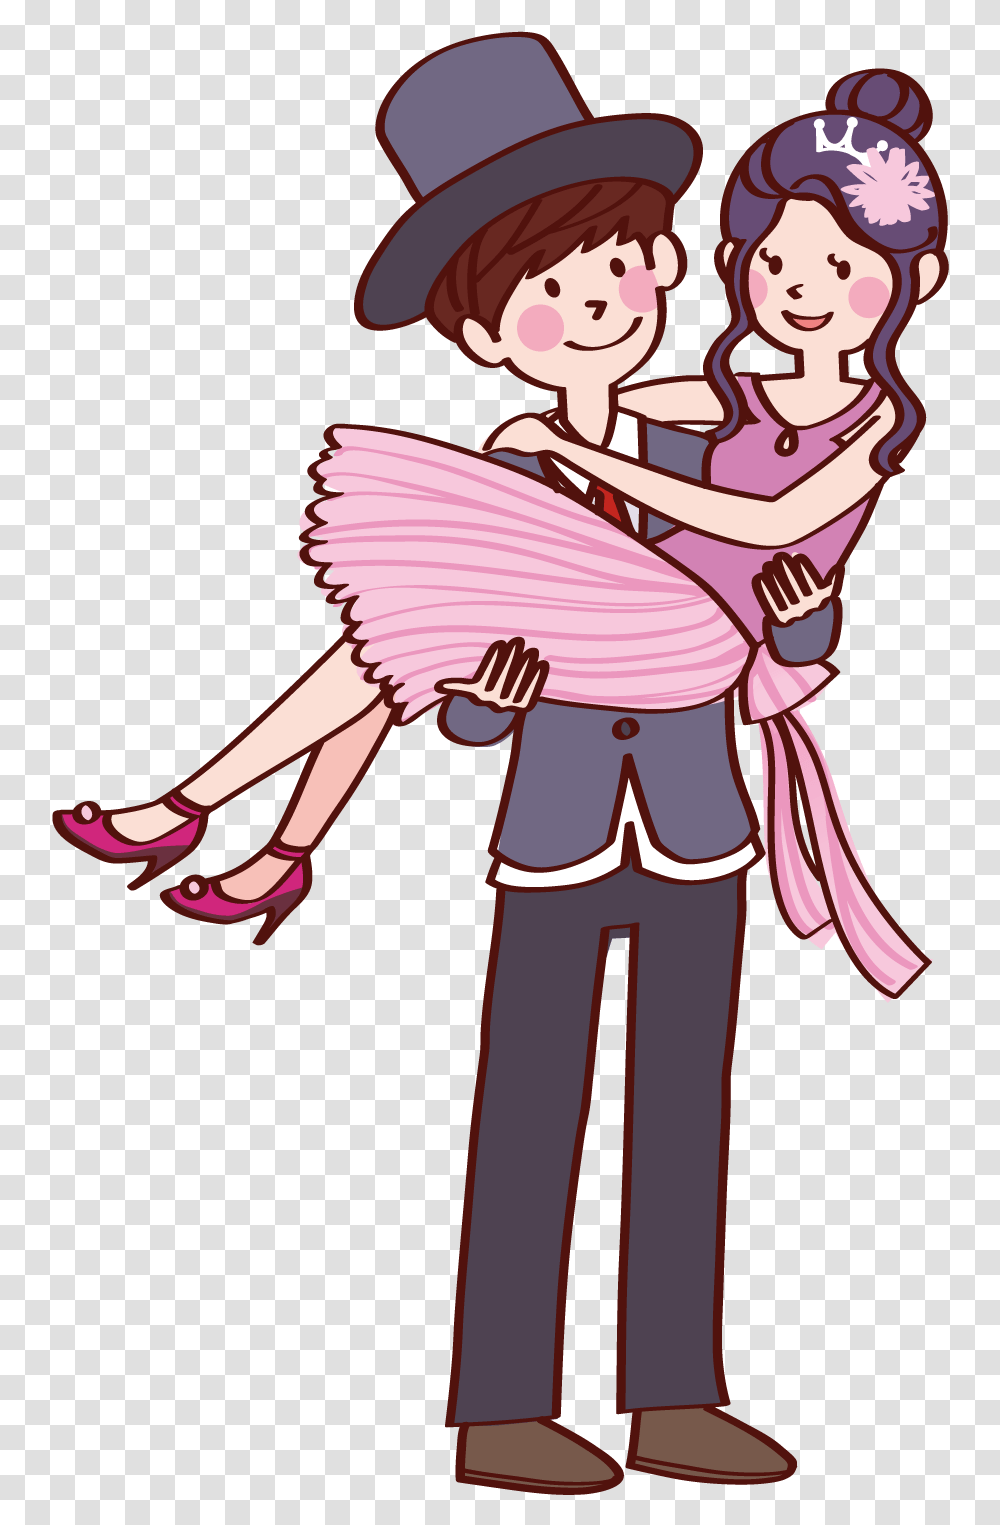 Couples Clip Fall In Love Cute Couple Image Animated Cute Love Couple Cartoon, Person, Costume, Female, Girl Transparent Png